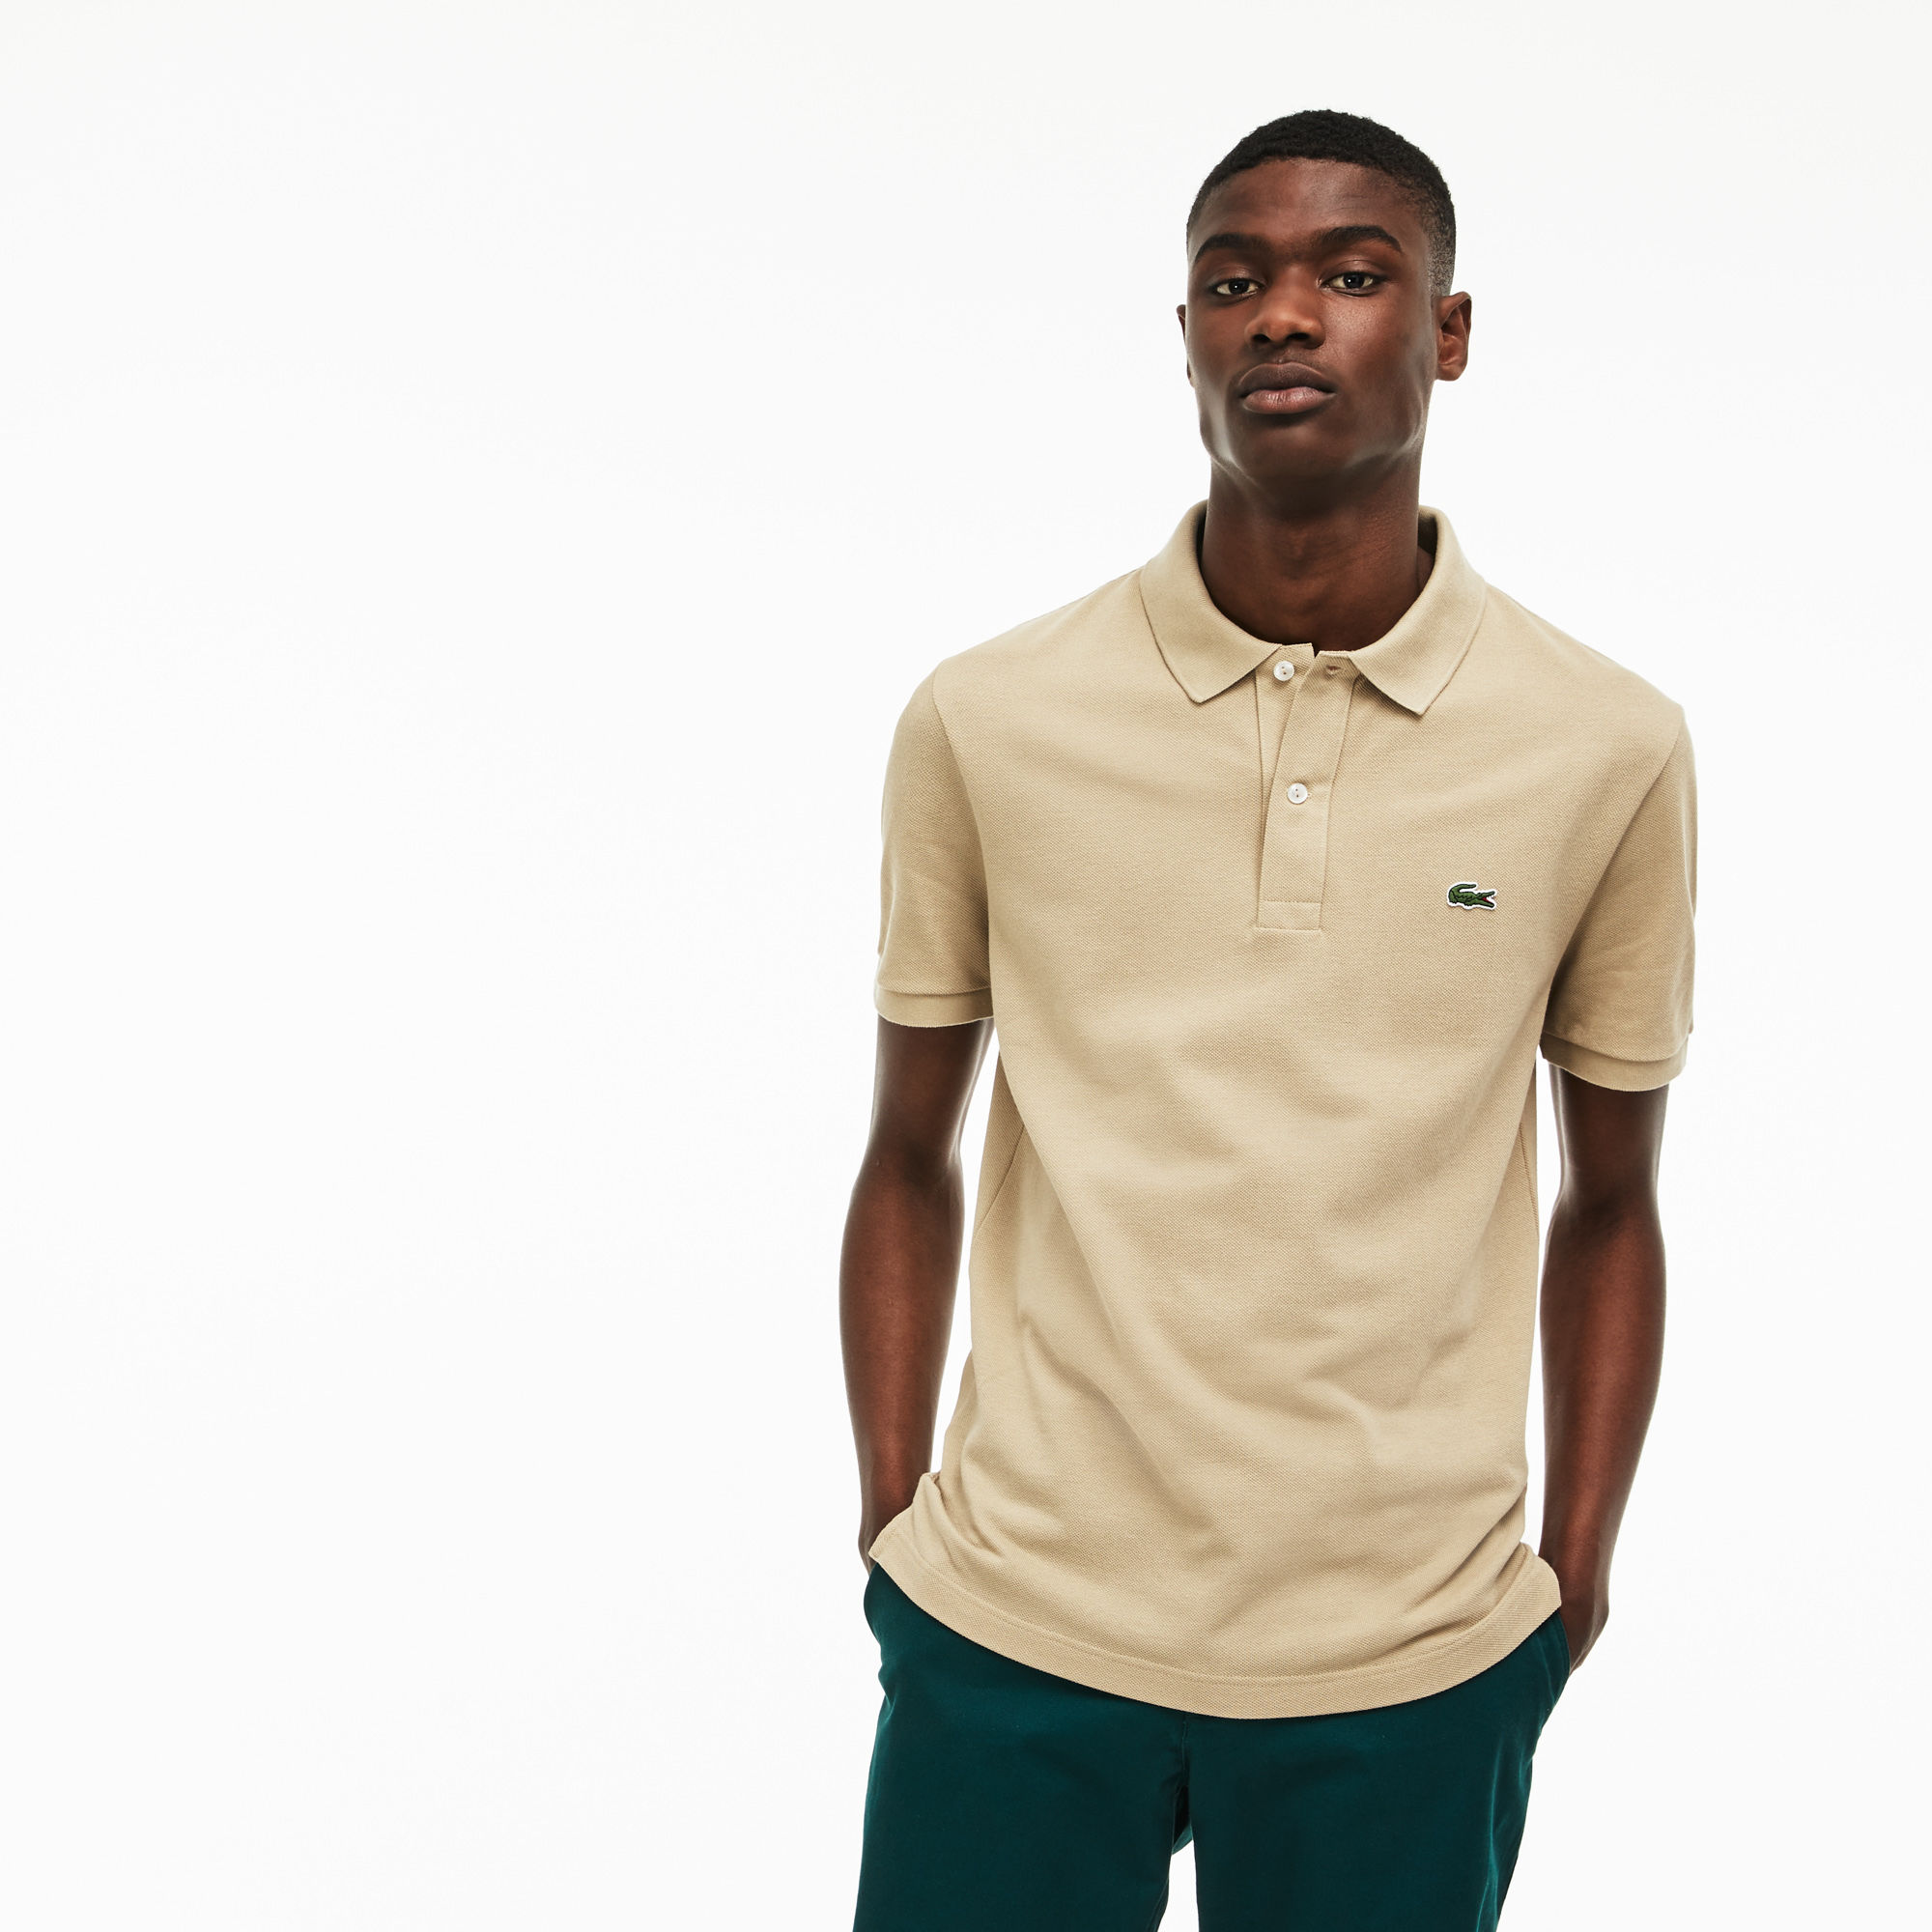 lacoste polo shirts philippines